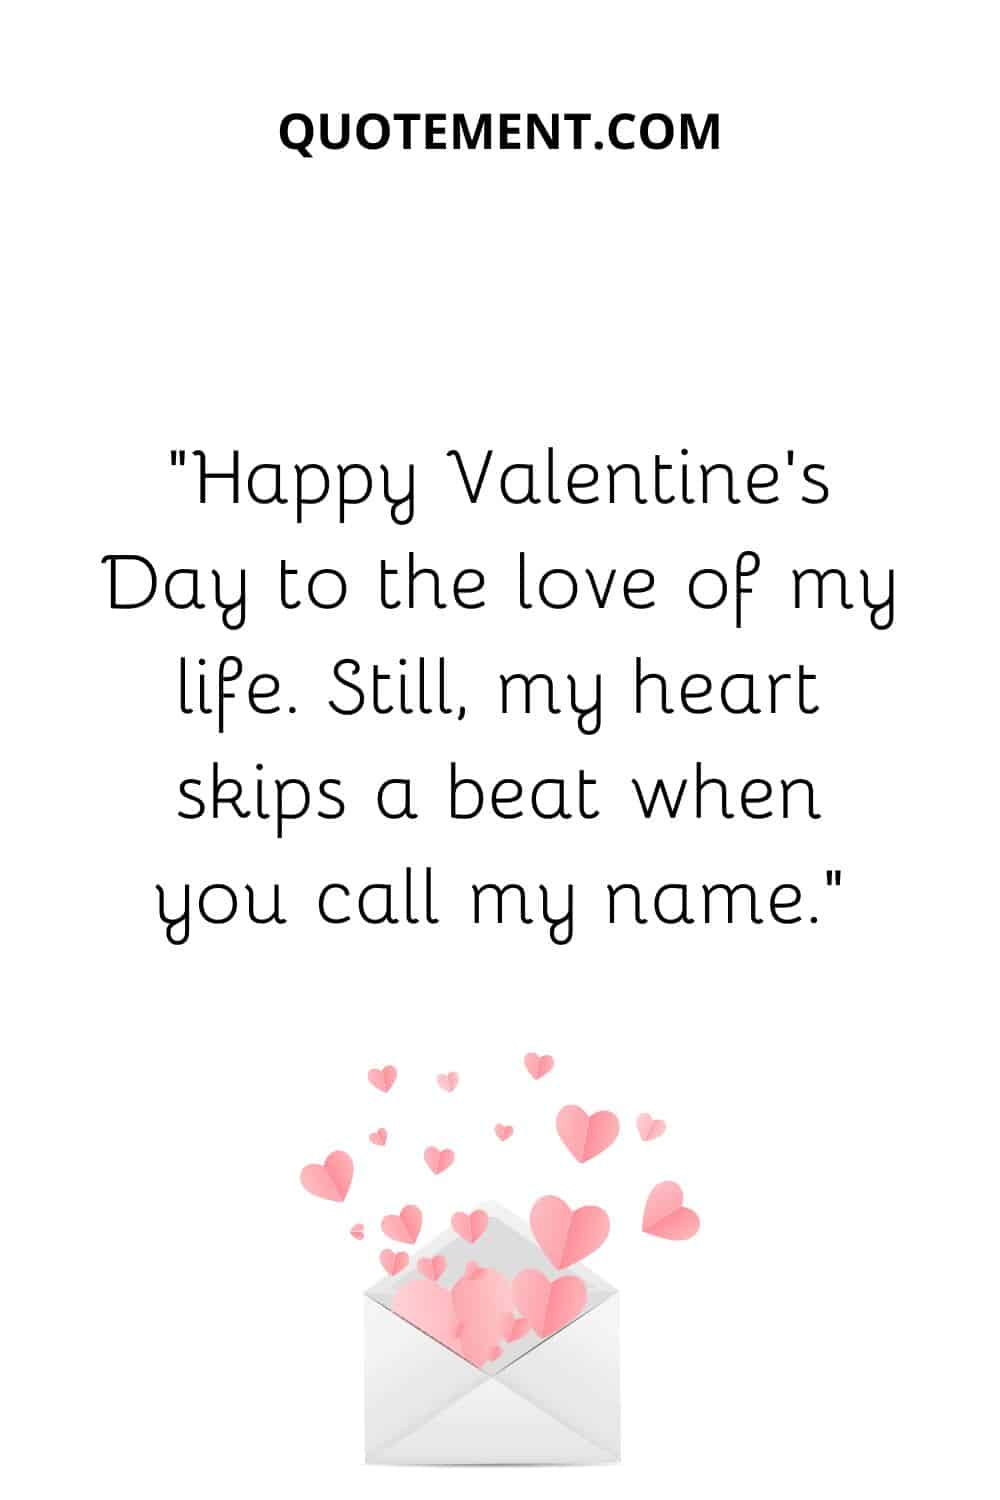 “Happy Valentine’s Day to the love of my life. Still, my heart skips a beat when you call my name.”